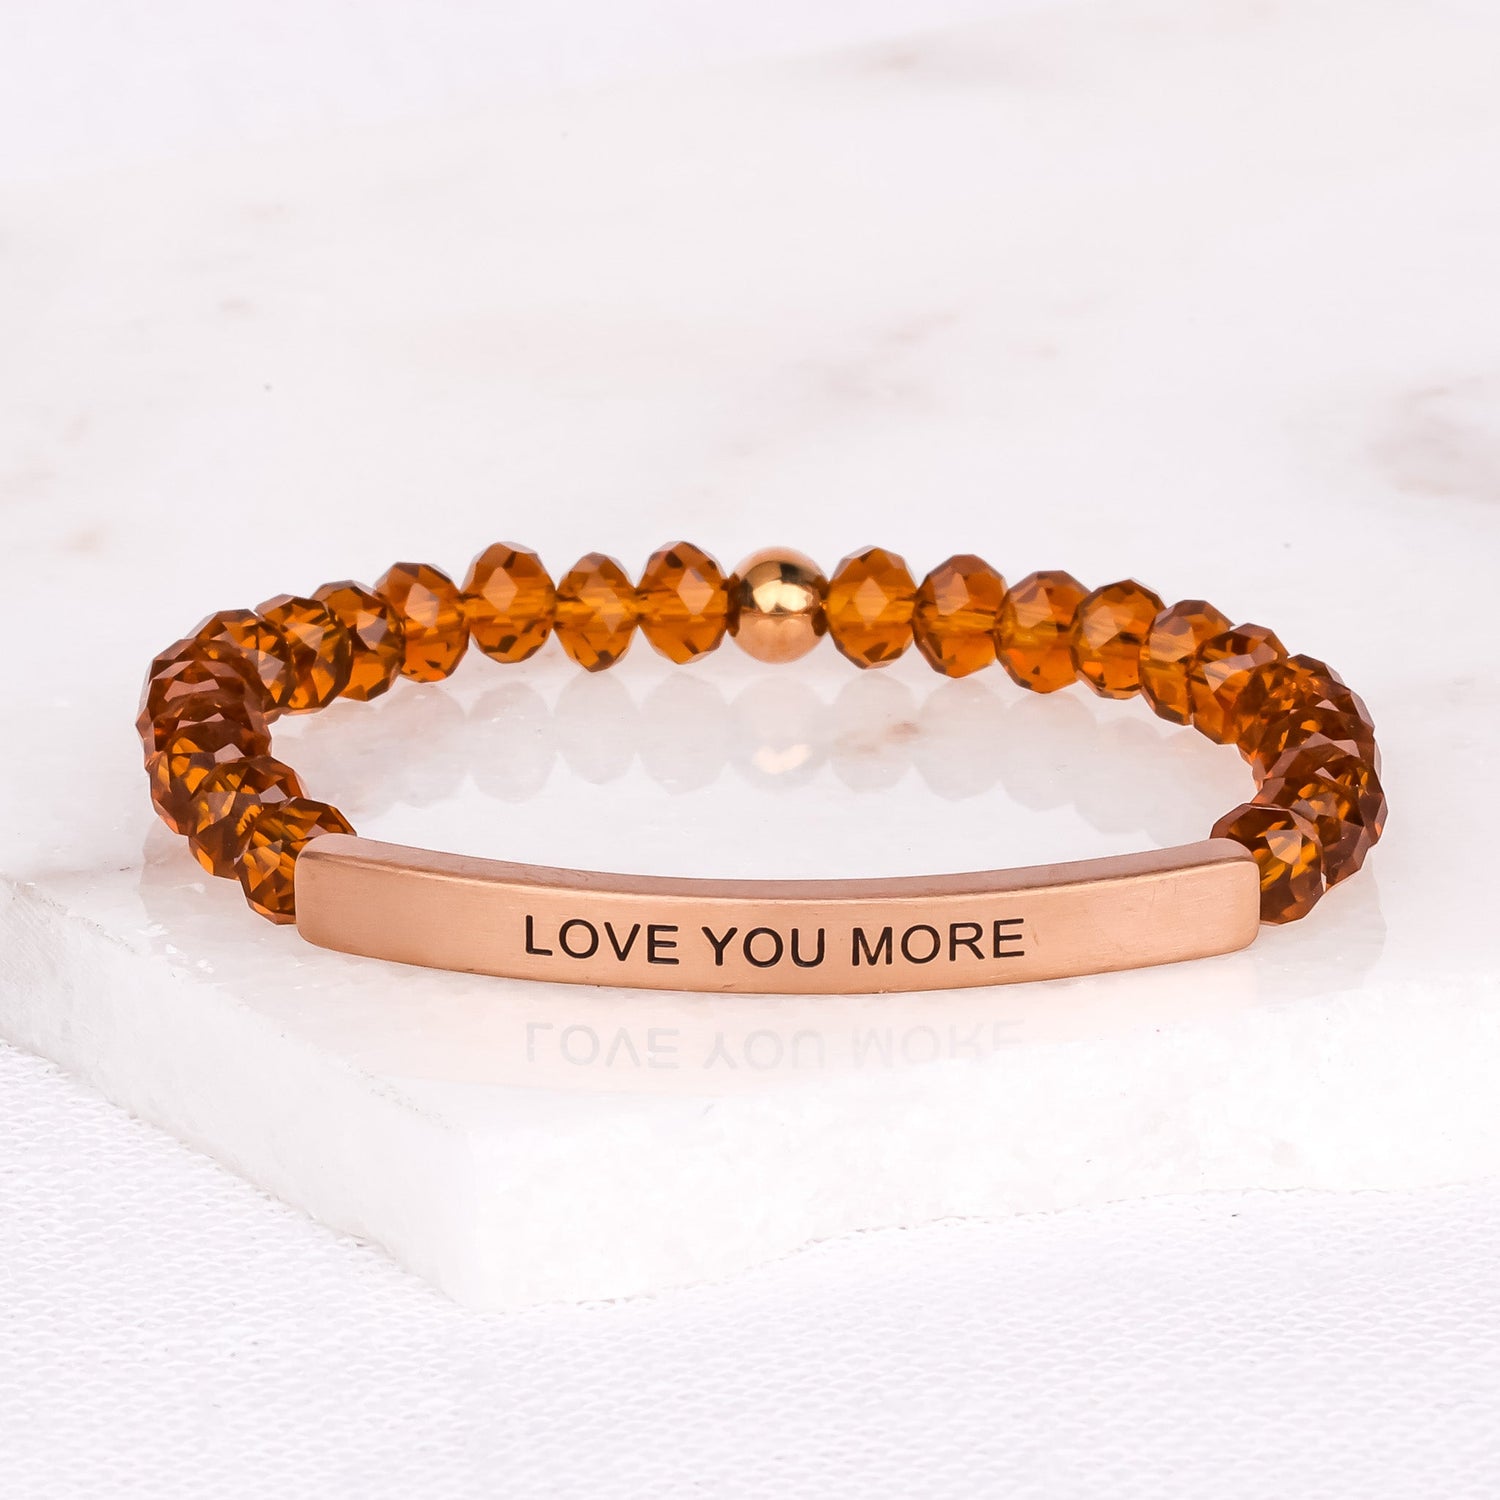 LOVE YOU MORE - Inspiration Co.